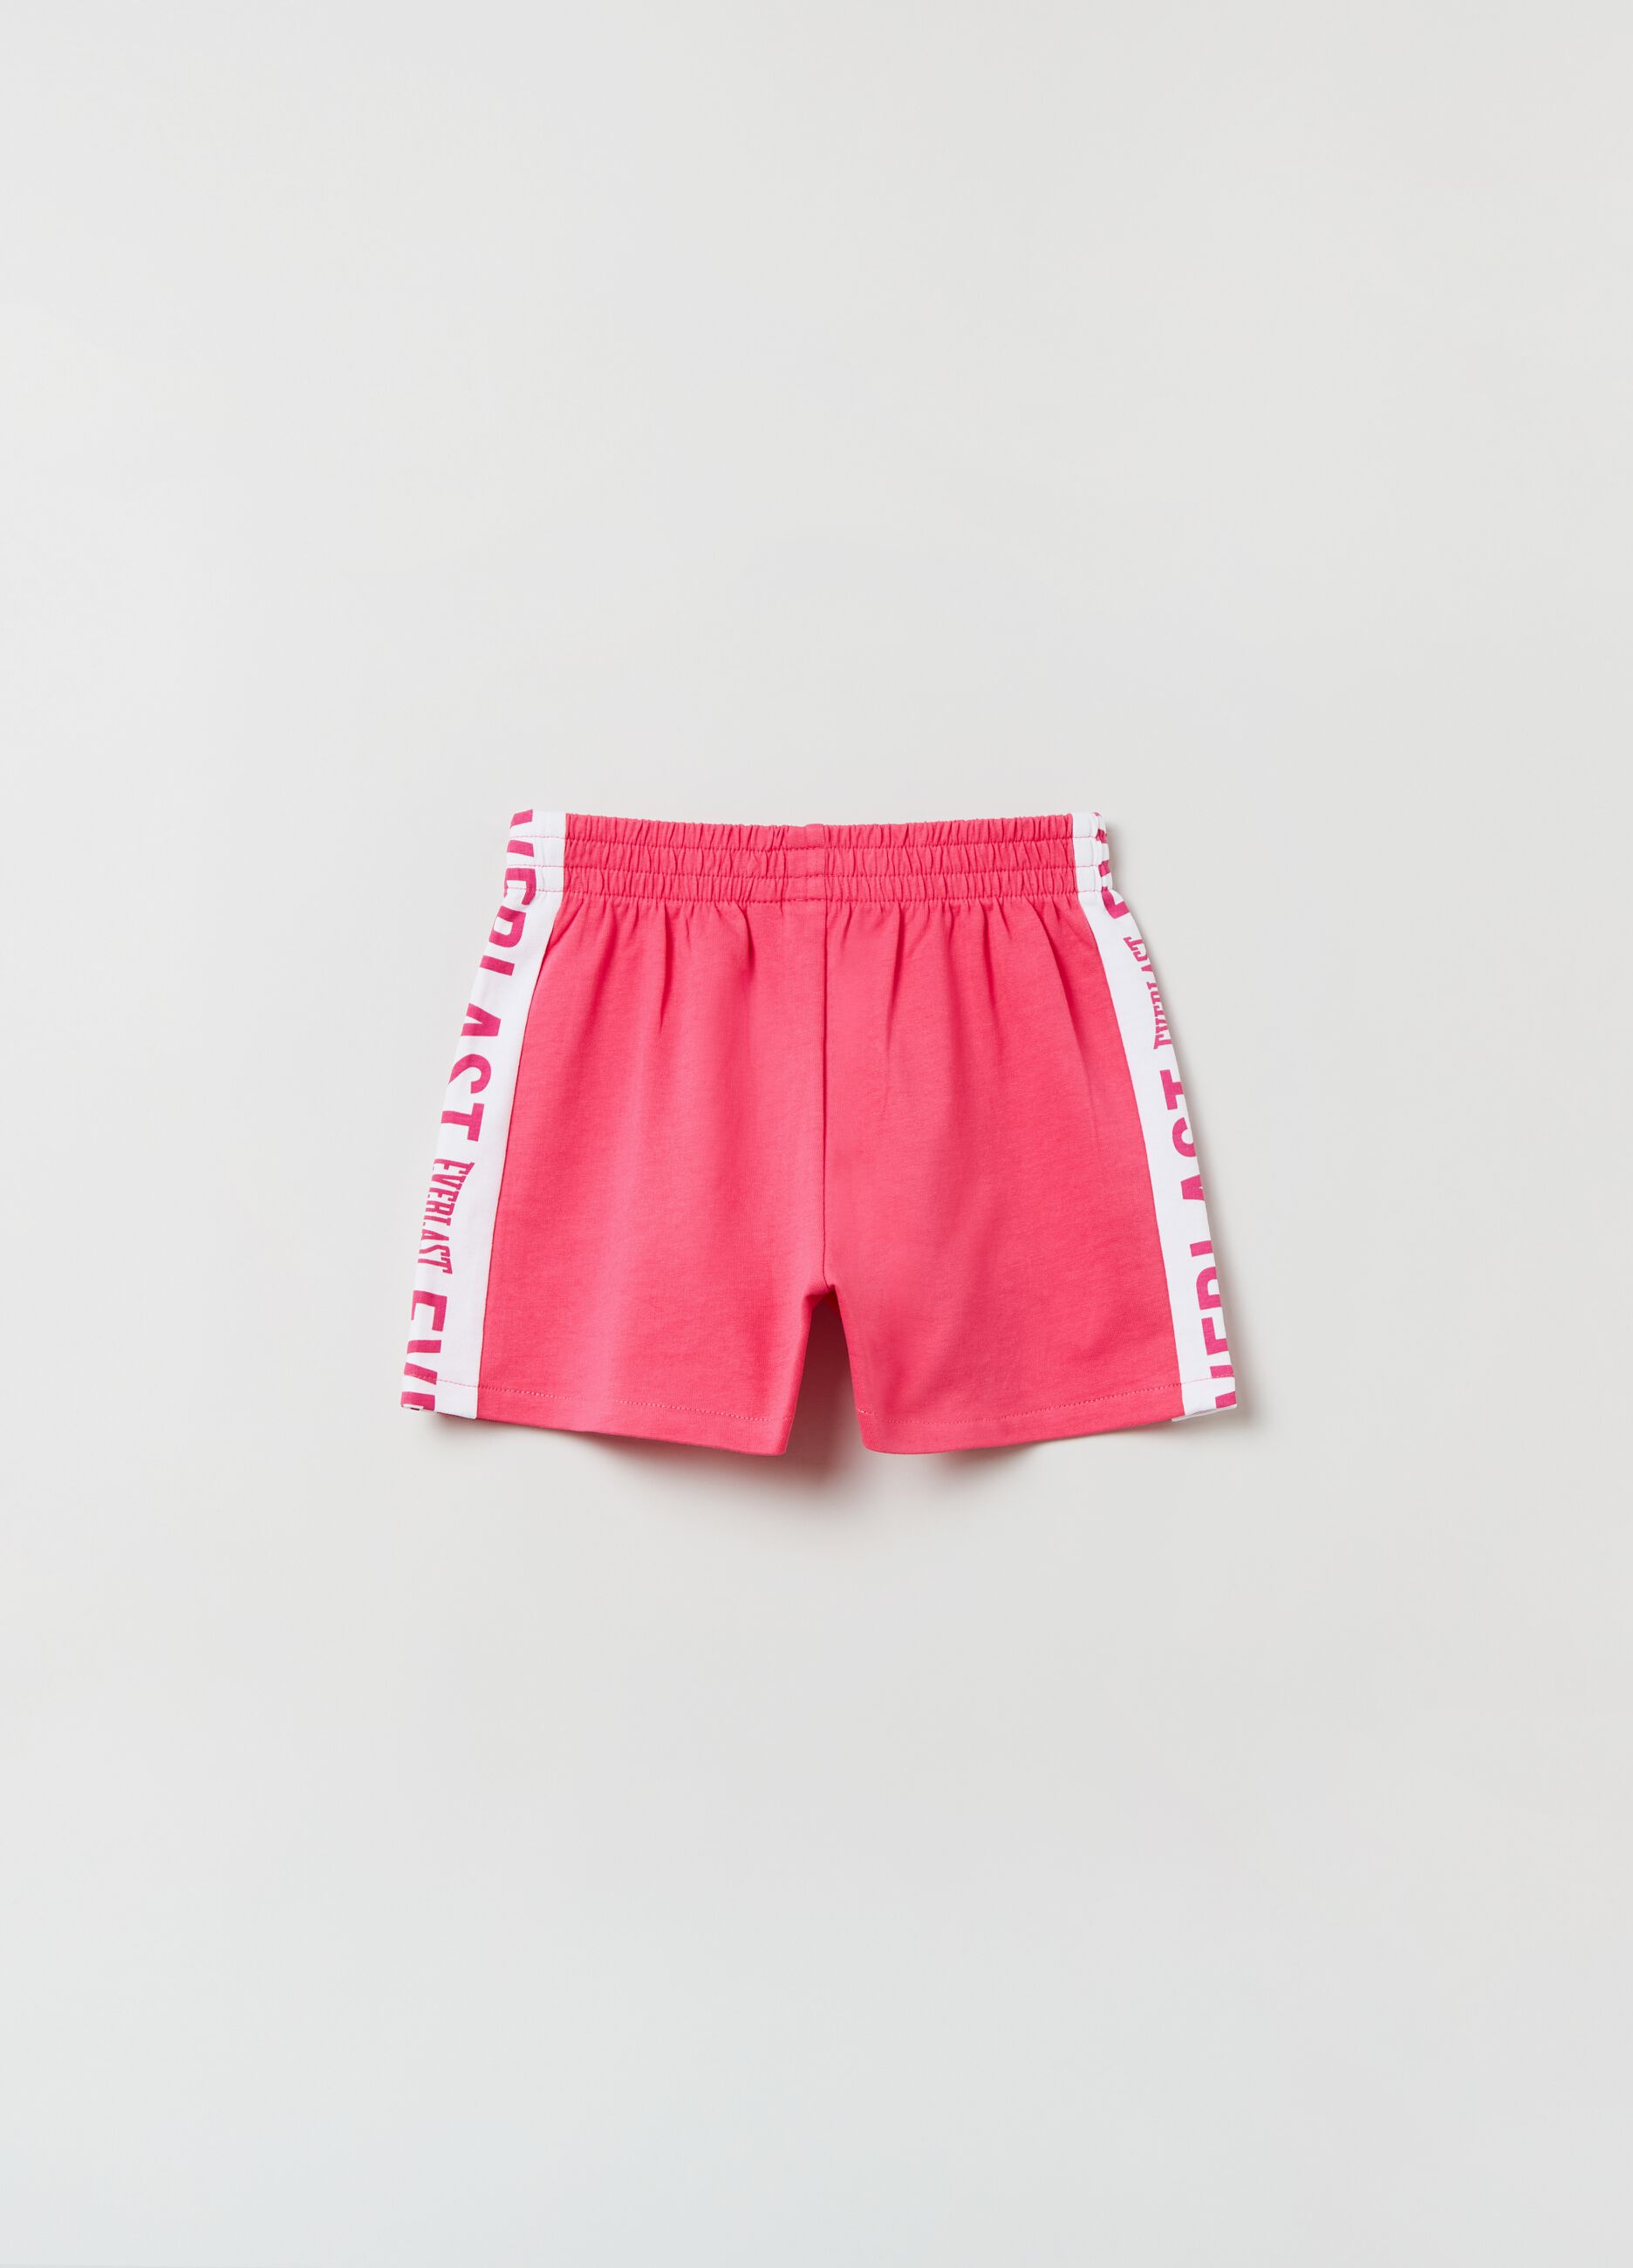 Stretch cotton shorts with Everlast print